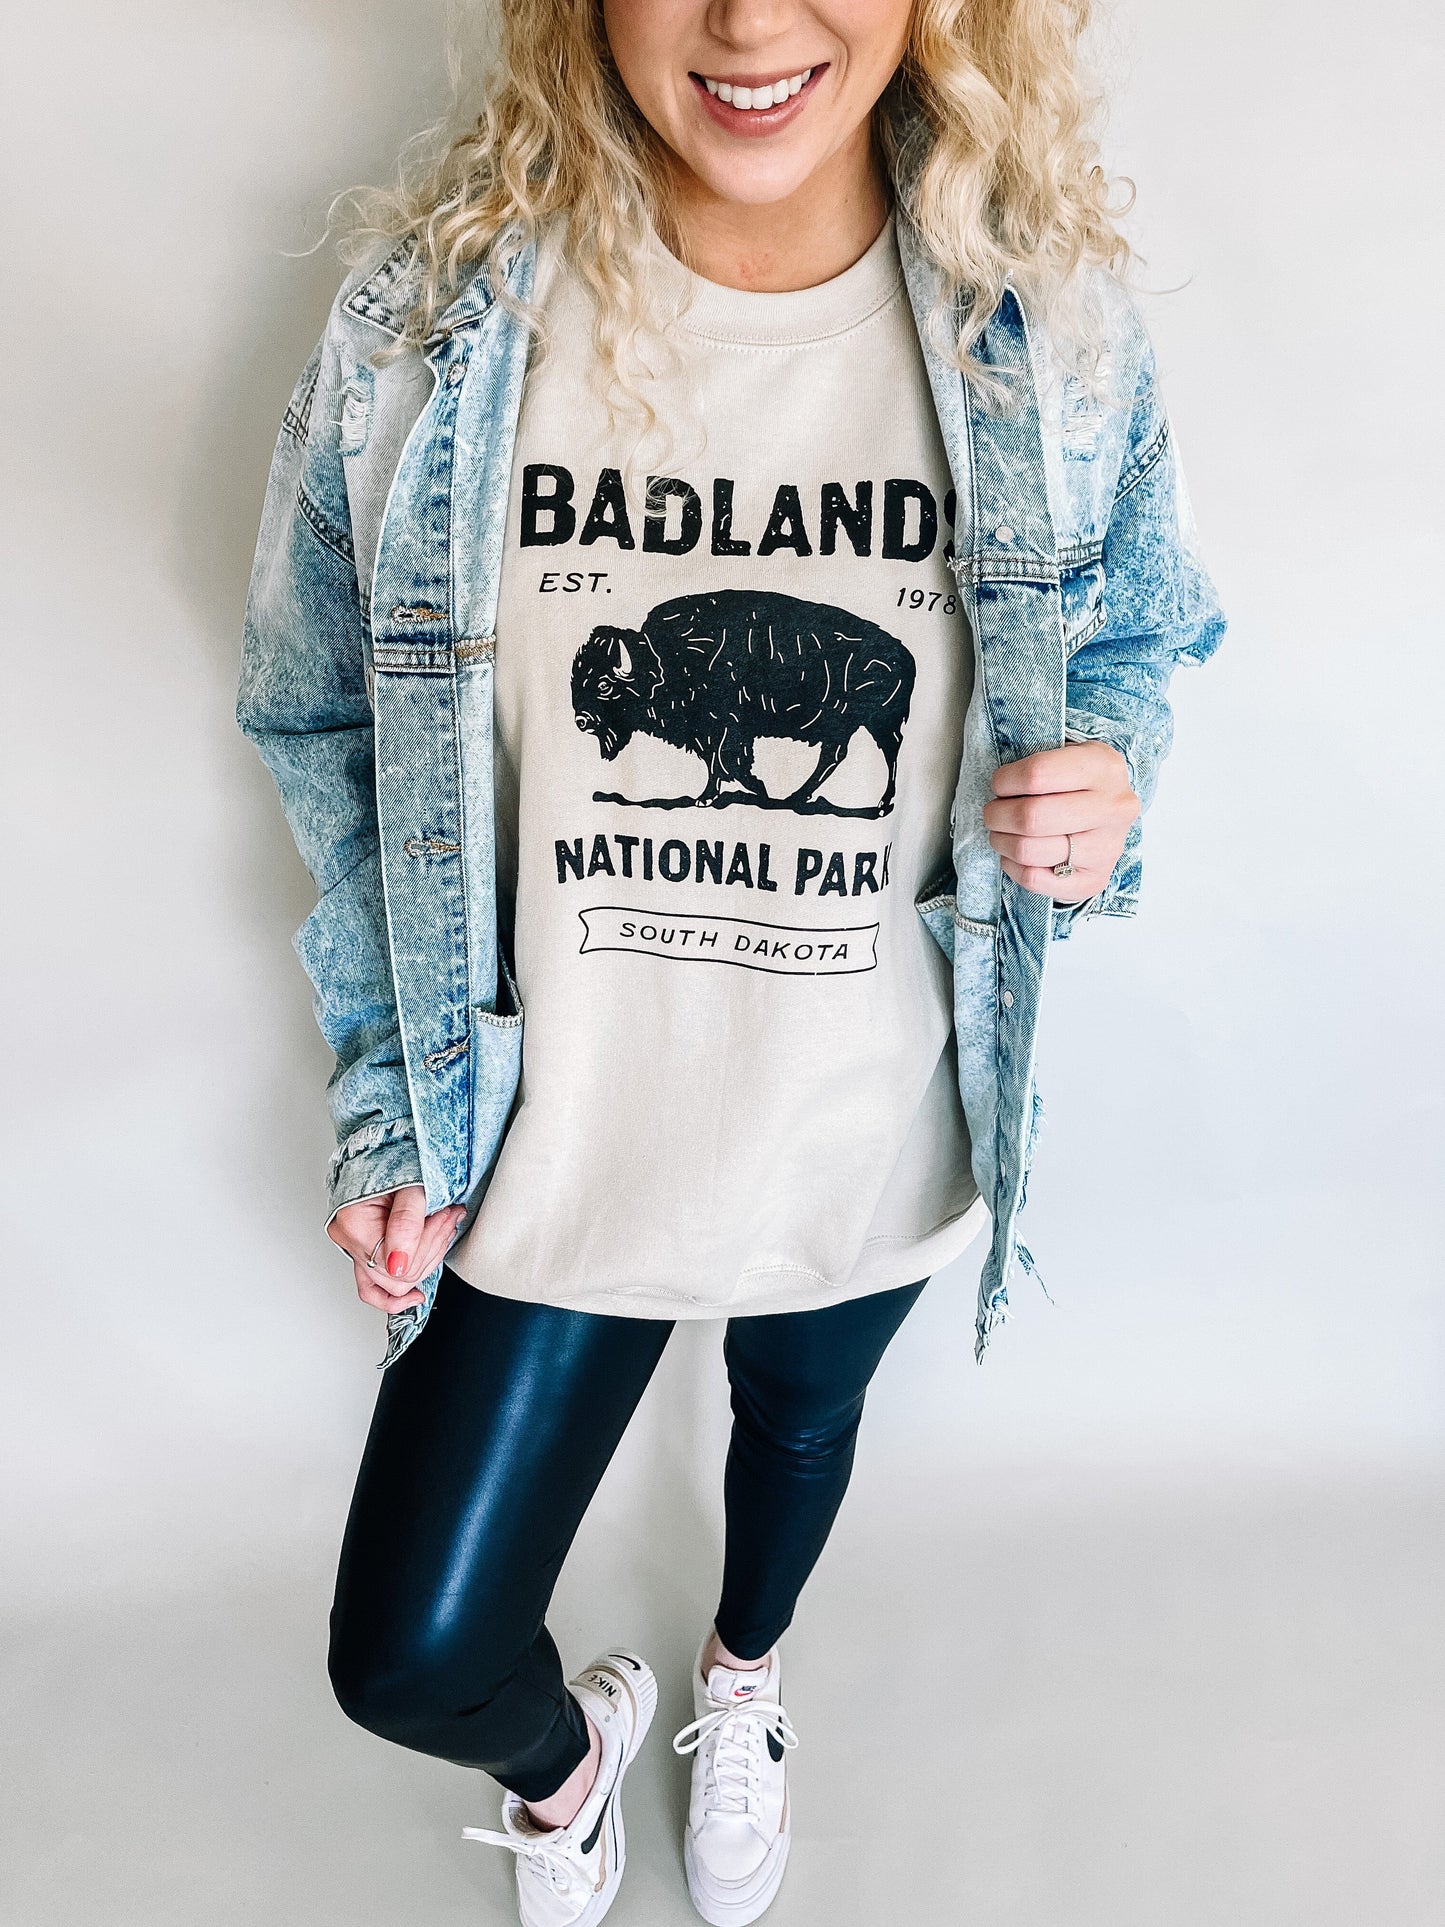 Casual yet stylish model wearing an oversized taupe sweatshirt with a graphic of Badlands National Park and a bison, paired with sleek leather leggings and comfortable white Nike tennis shoes, creating a trendy and relaxed outfit